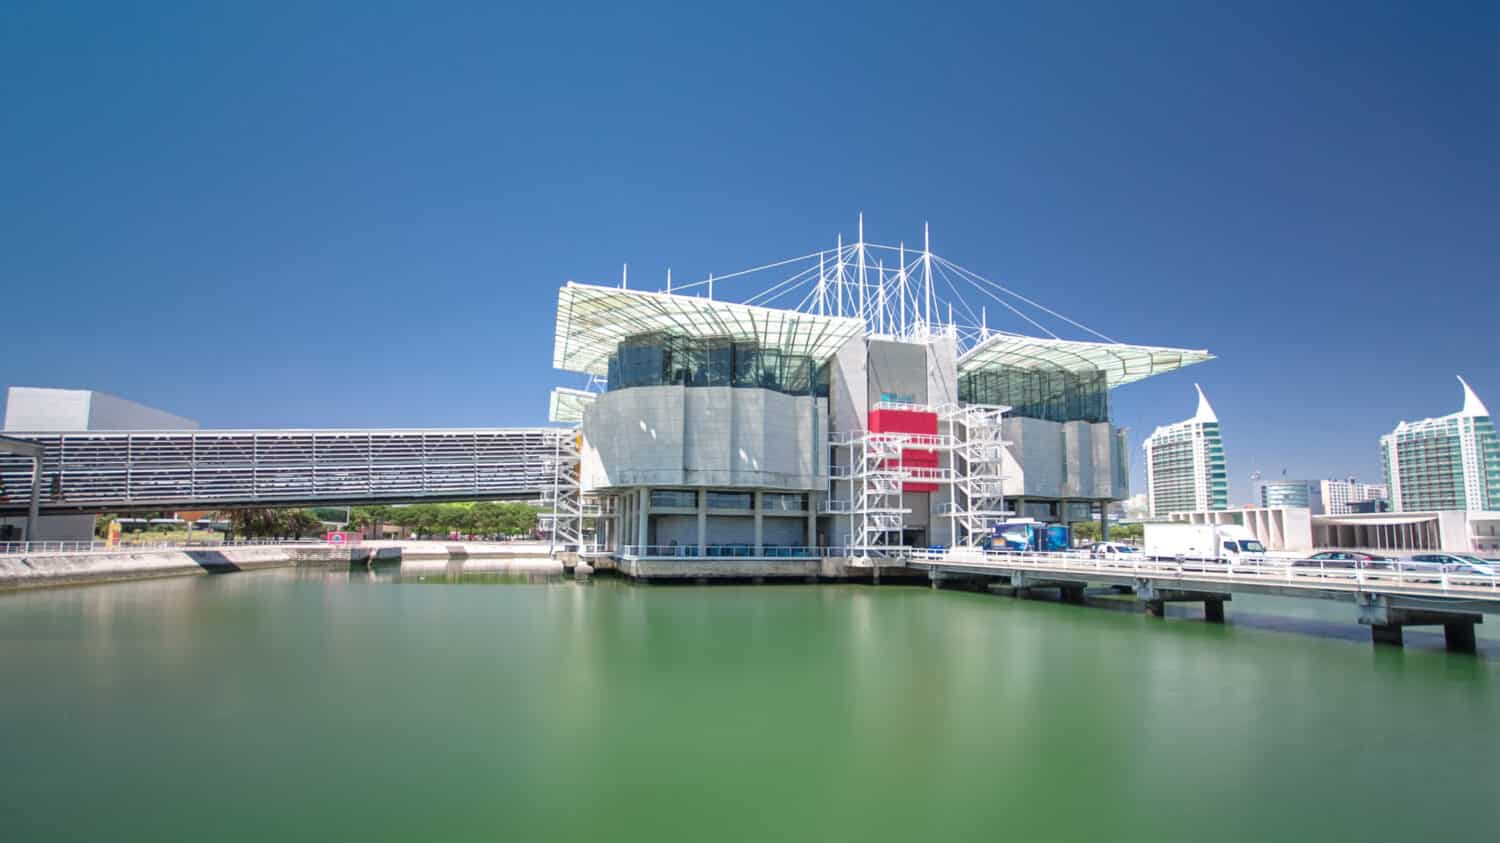 Lisbon Oceanarium, the second largest oceanarium in the world and the biggest in Europe. Parque das Nacoes. Portugal. Timelapse hyperlapse with blue sky and green water 4K